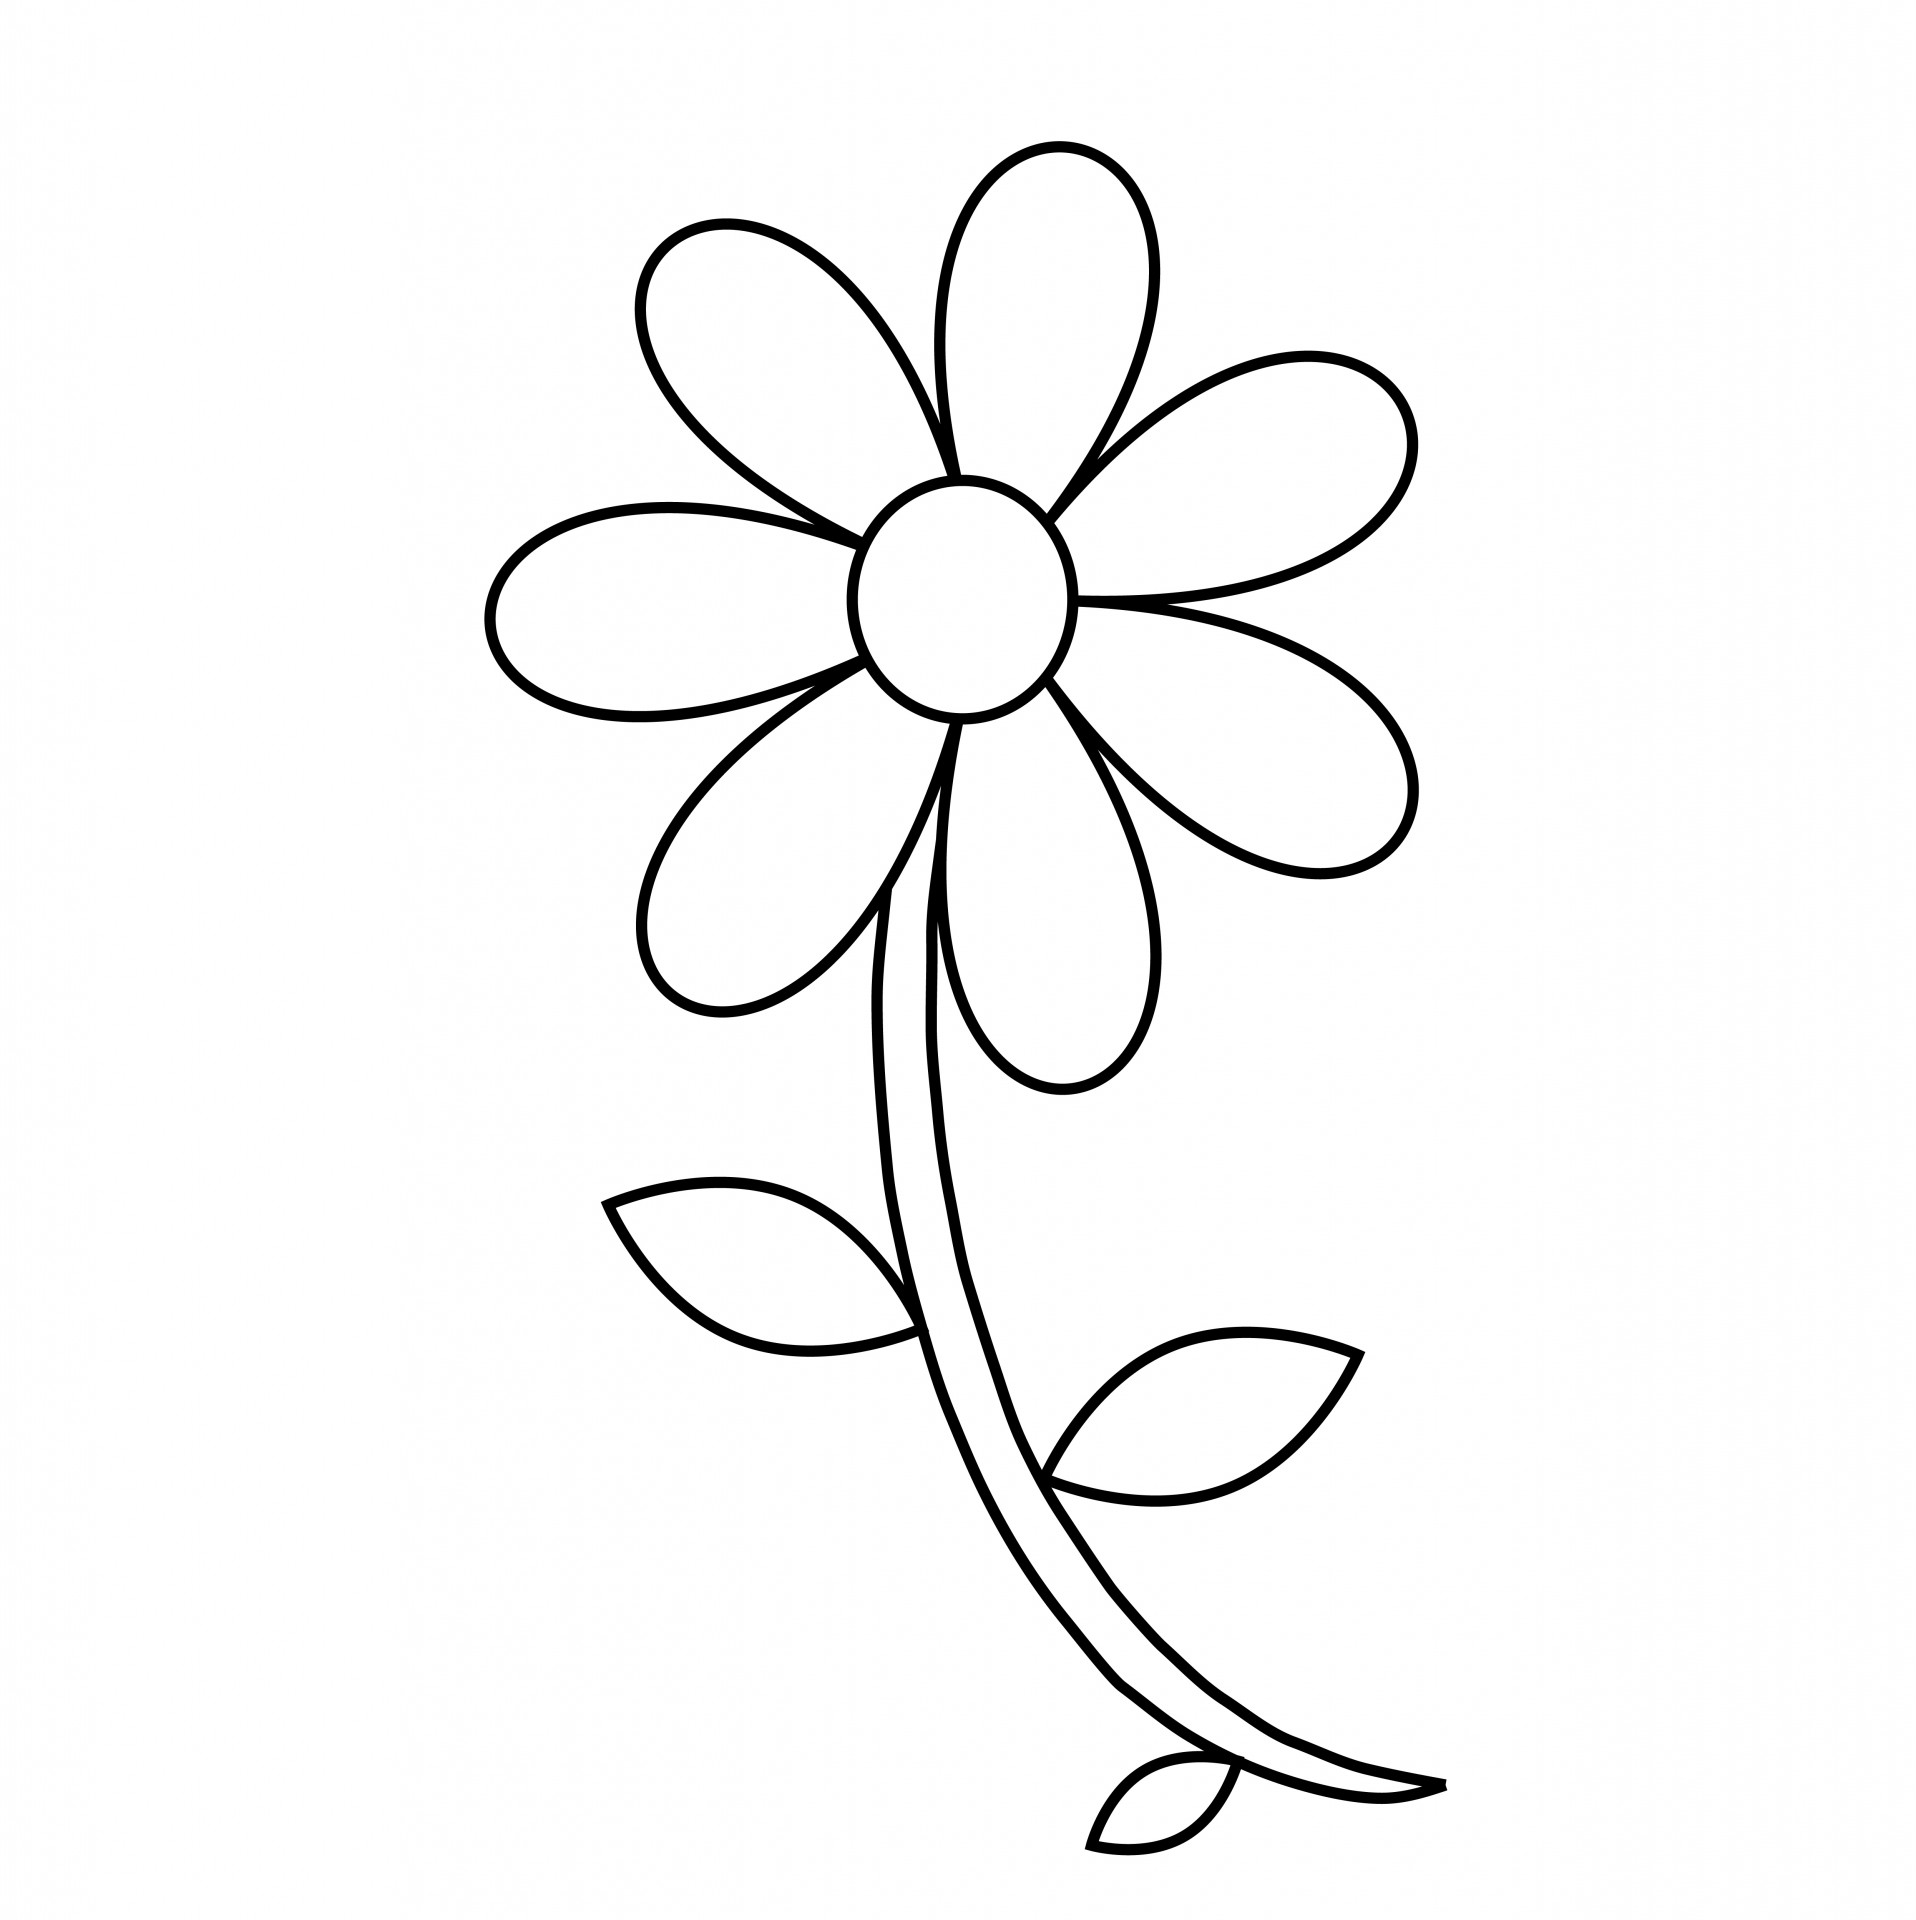 flower outline coloring page line art tutorial id 101747 ...